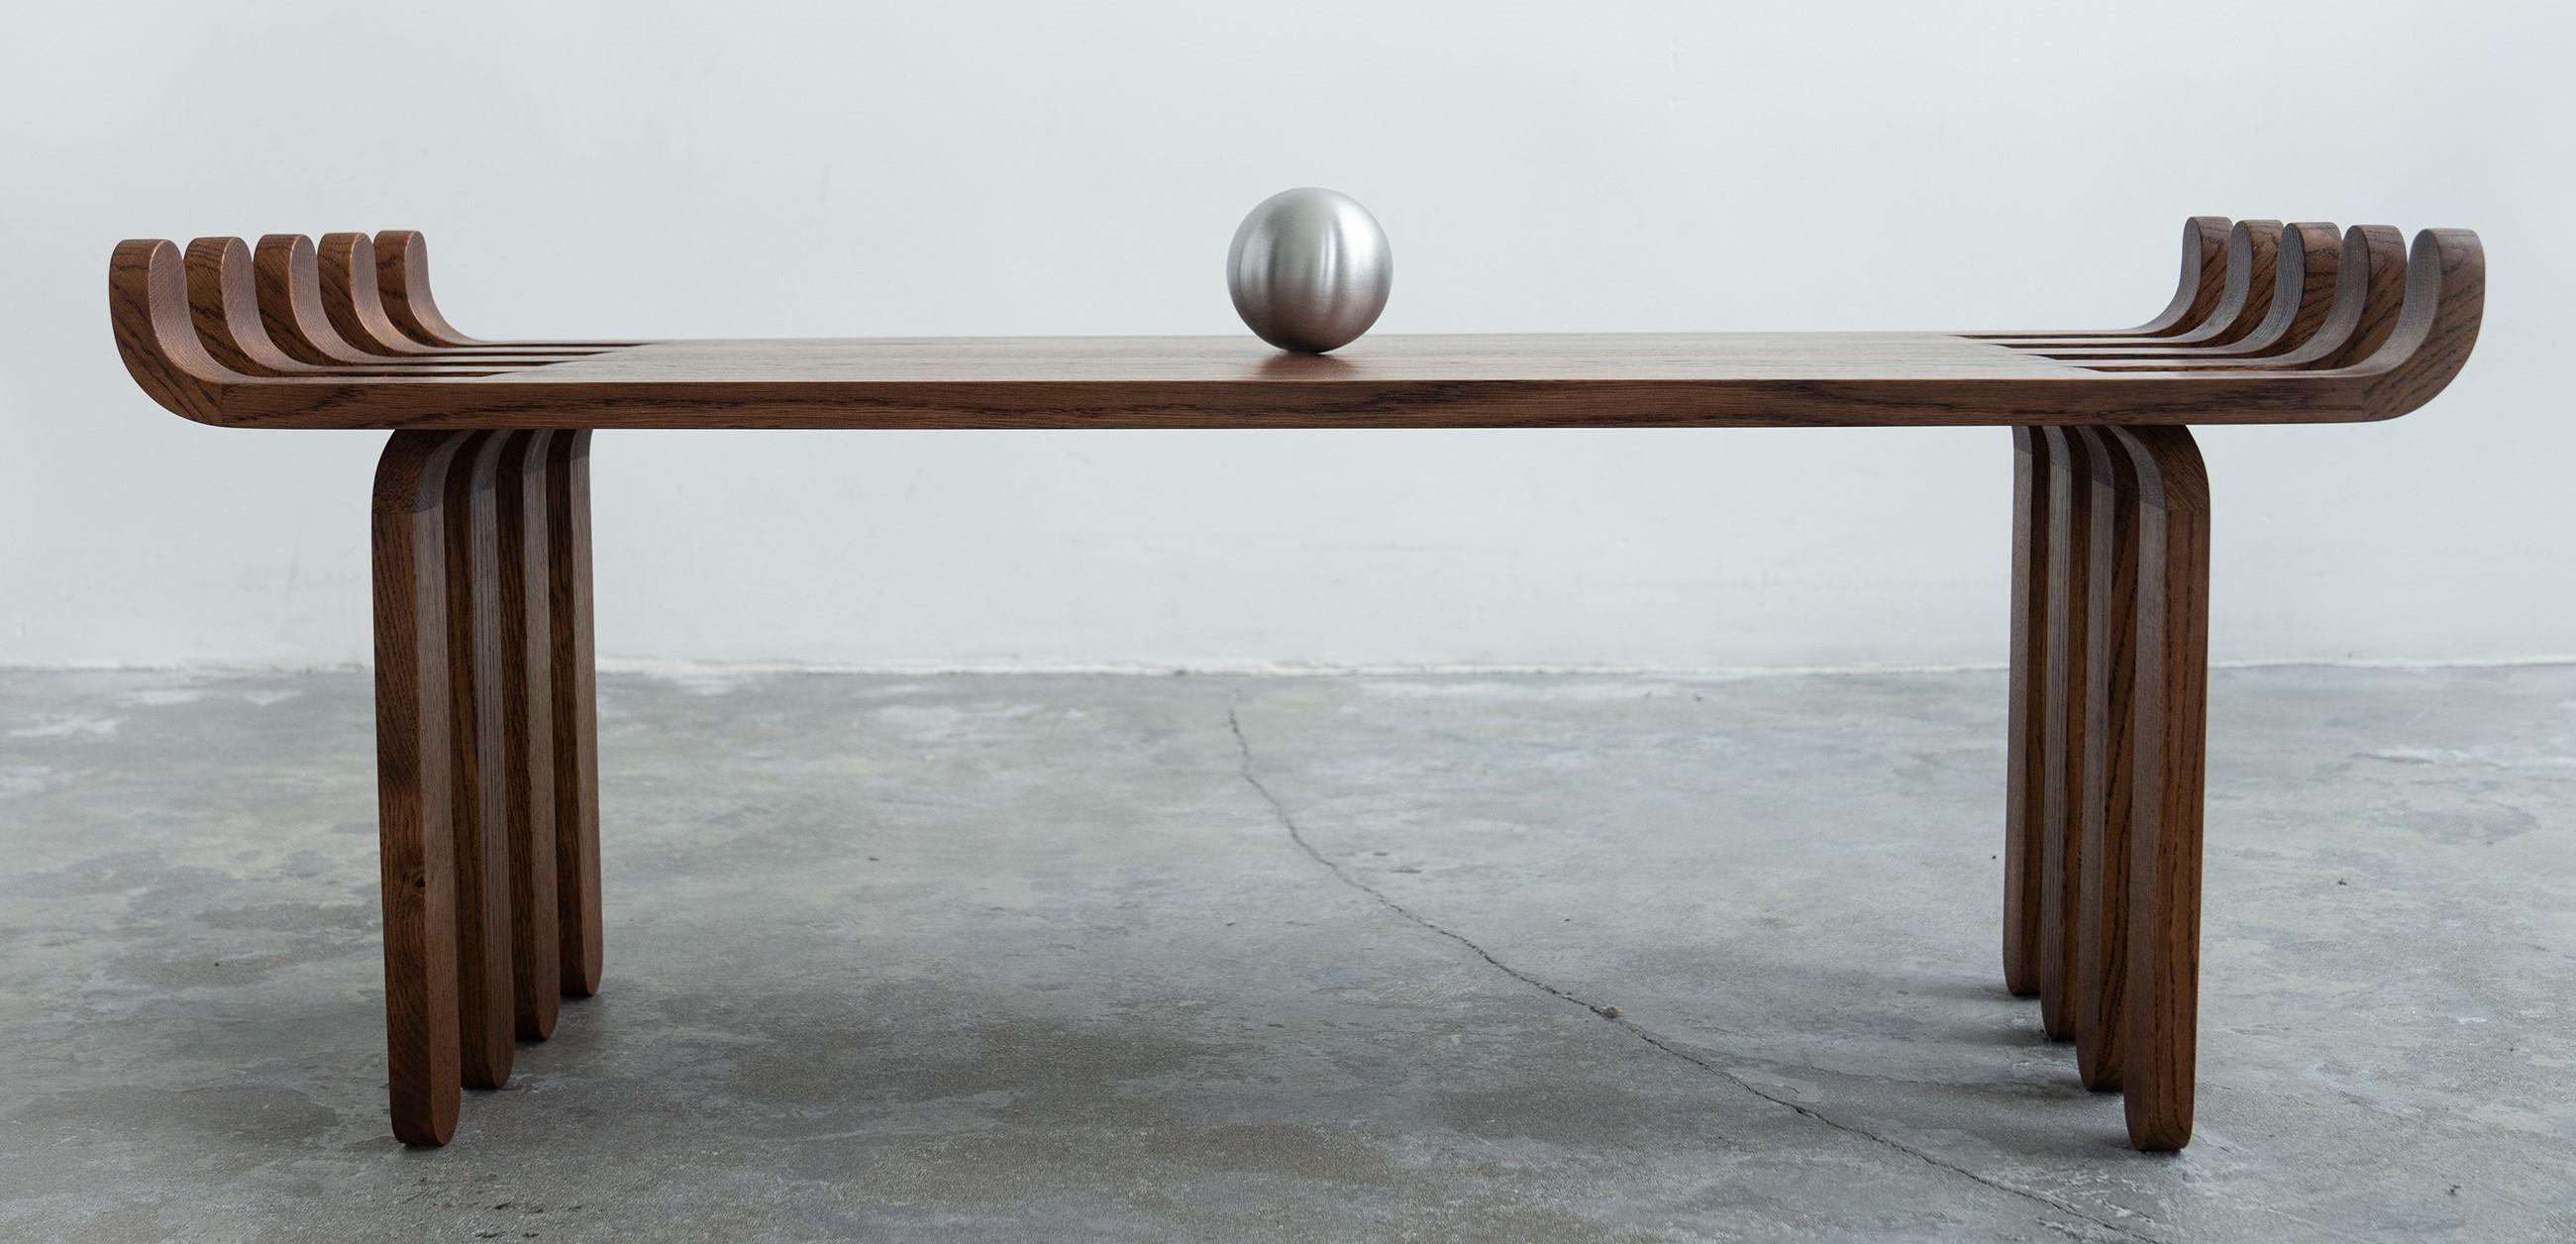 Fuga Coffee Table by Katryna Sadauskaite
Dimensions: W 36 x L 100  x H 41 cm
Materials: Oak Wood, Stainless steel, Wooden parts have hard wax oil finish.

A designer from Lithuania, searching for a balance between function and minimal aesthetics.